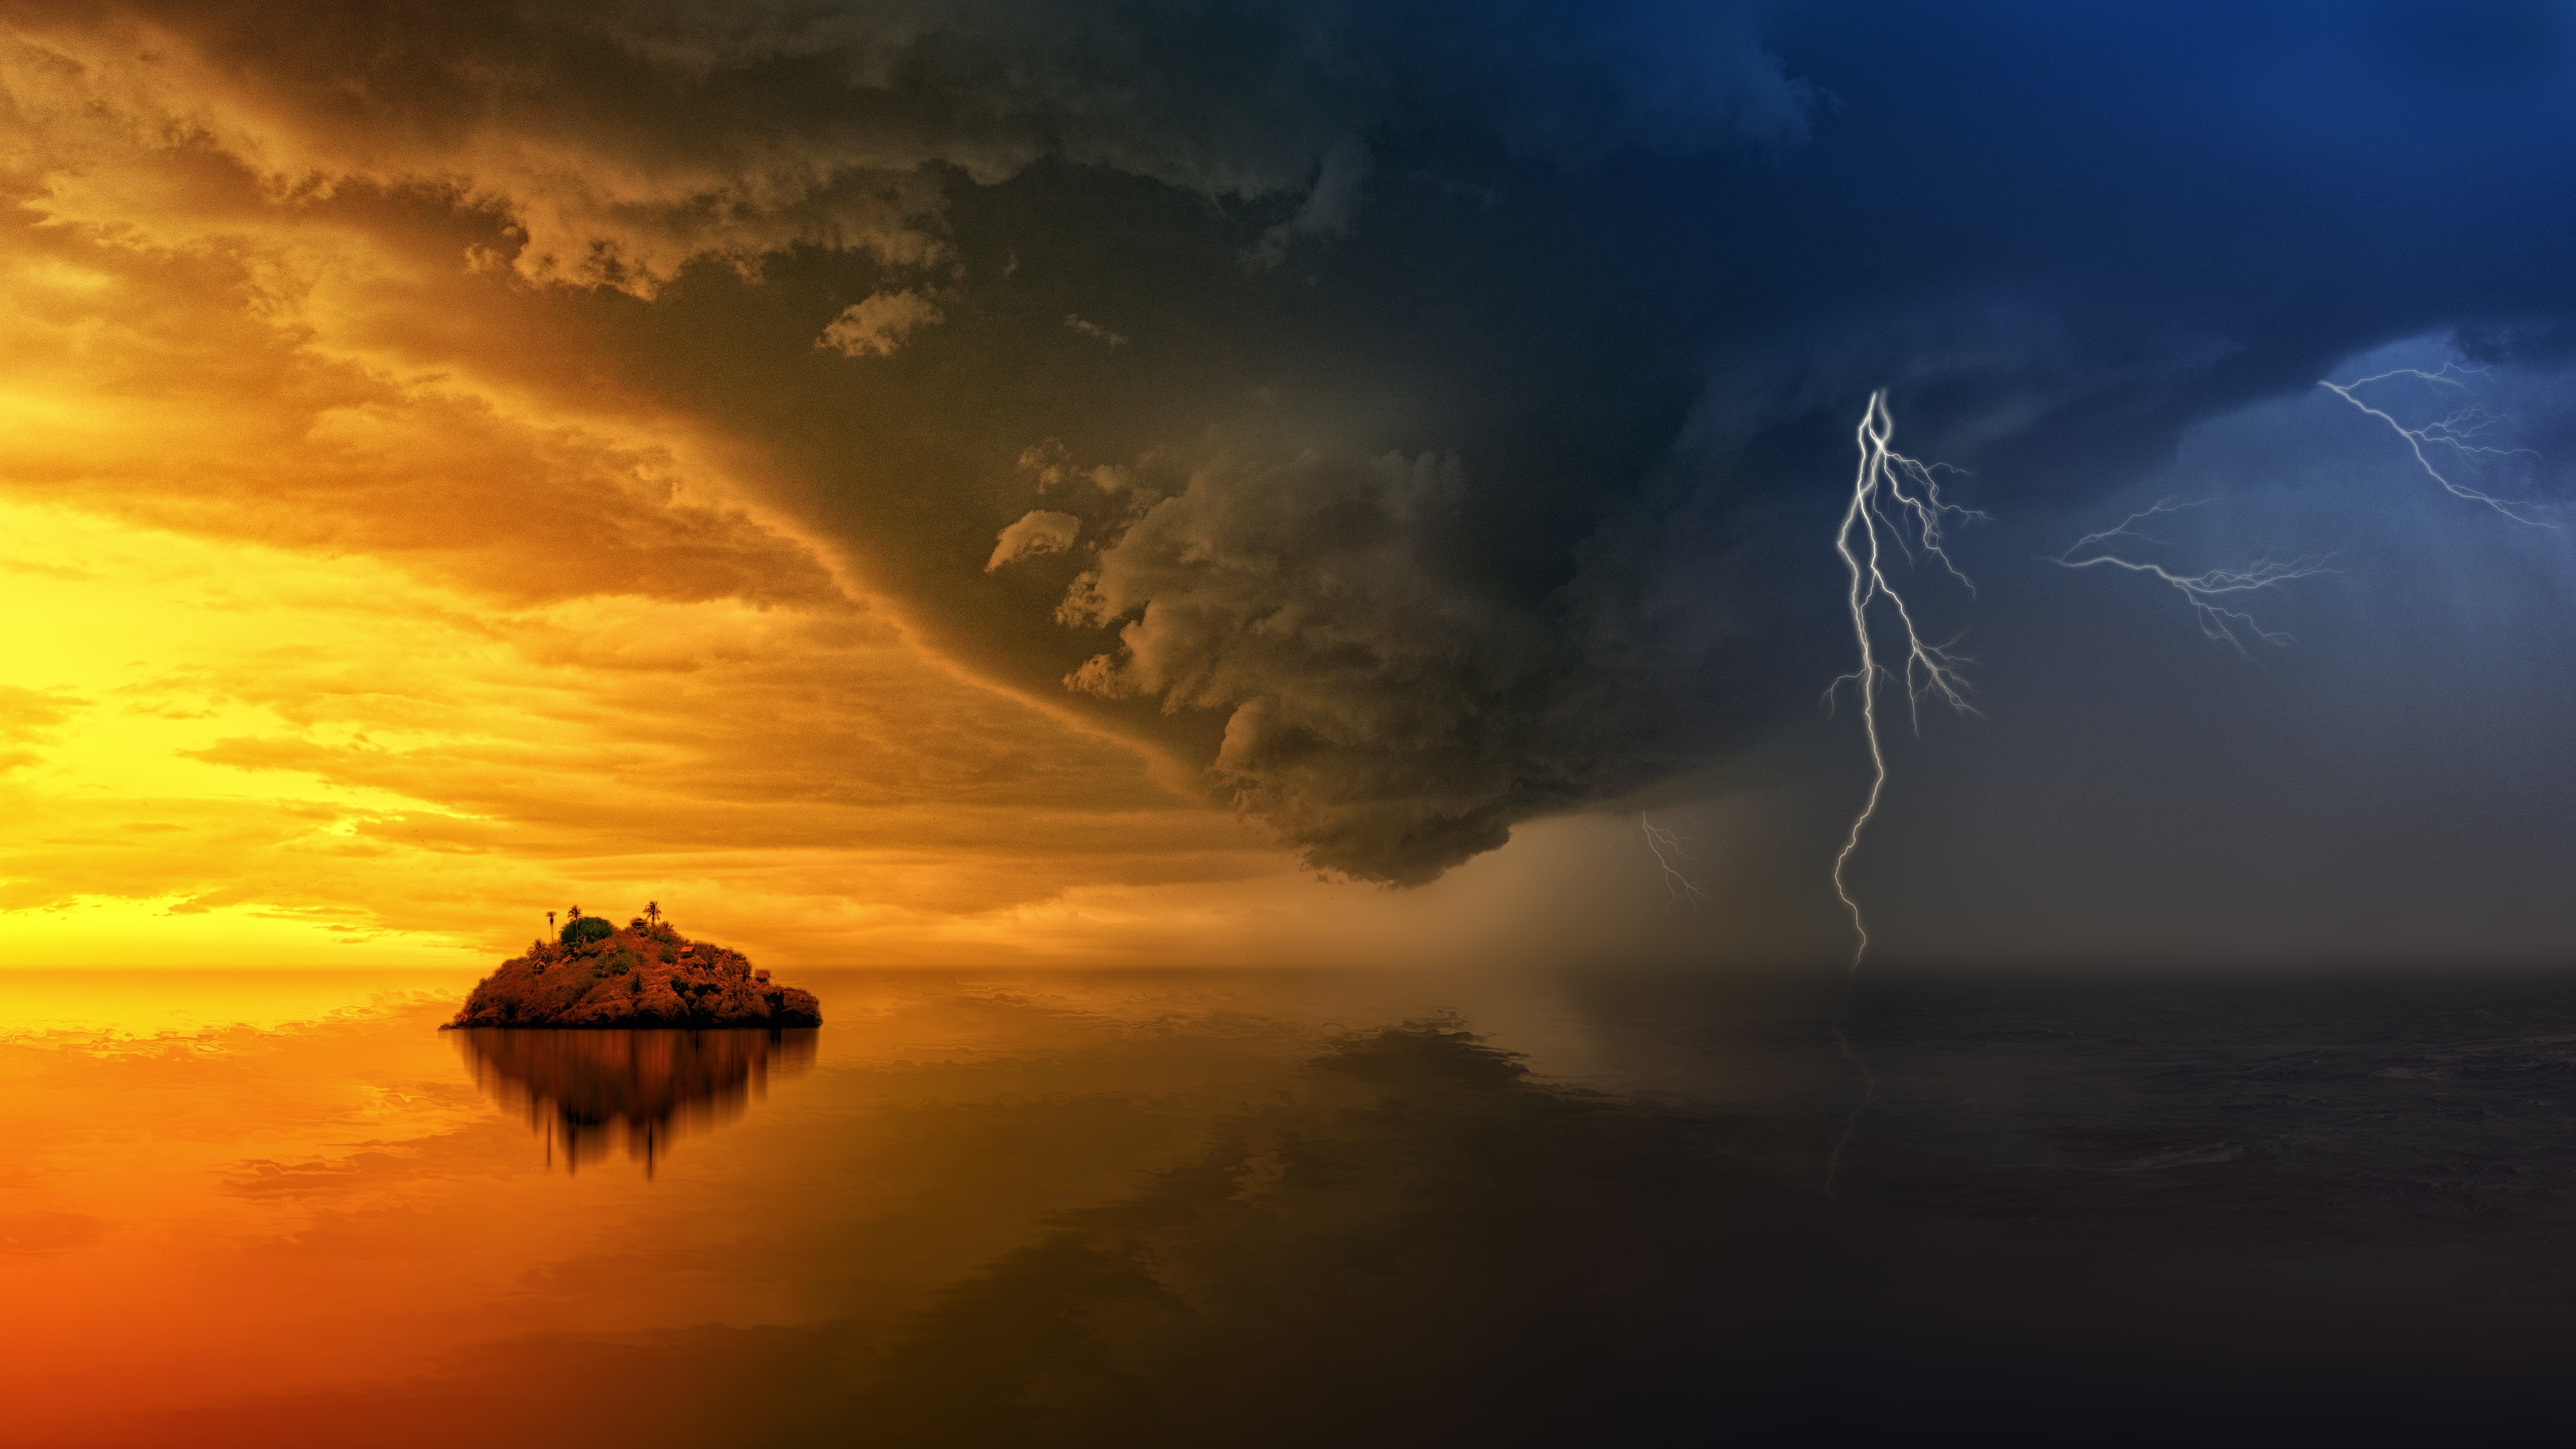 island-during-golden-hour-and-upcoming-storm-1118873